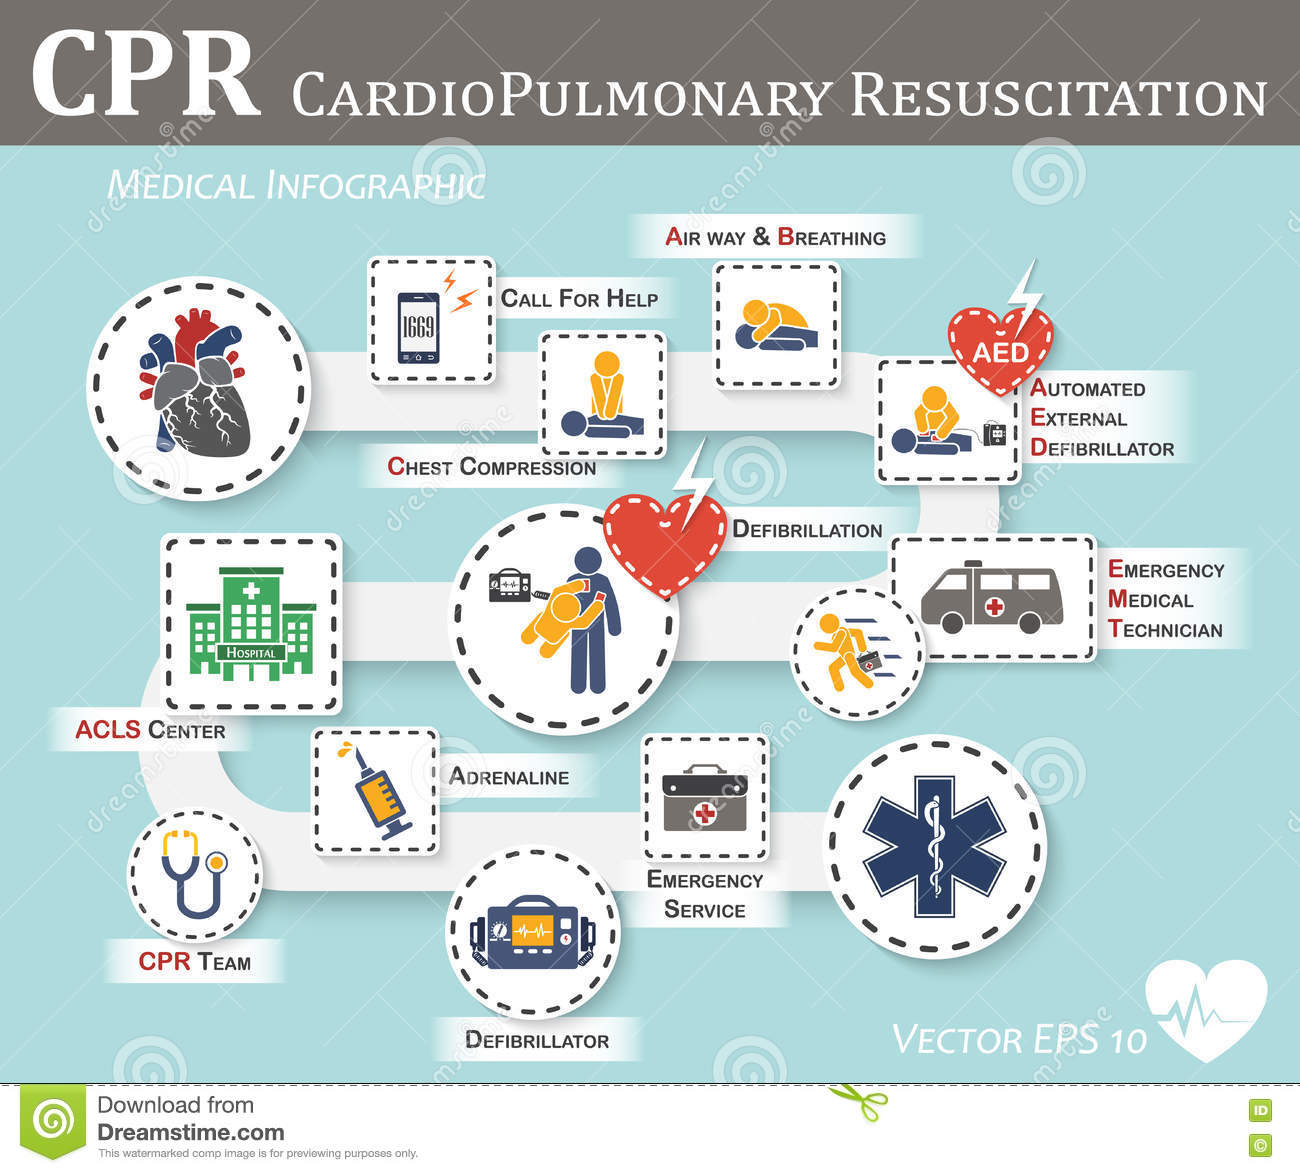 The basics of cardiopulmonary resuscitation (CPR) that you need to know